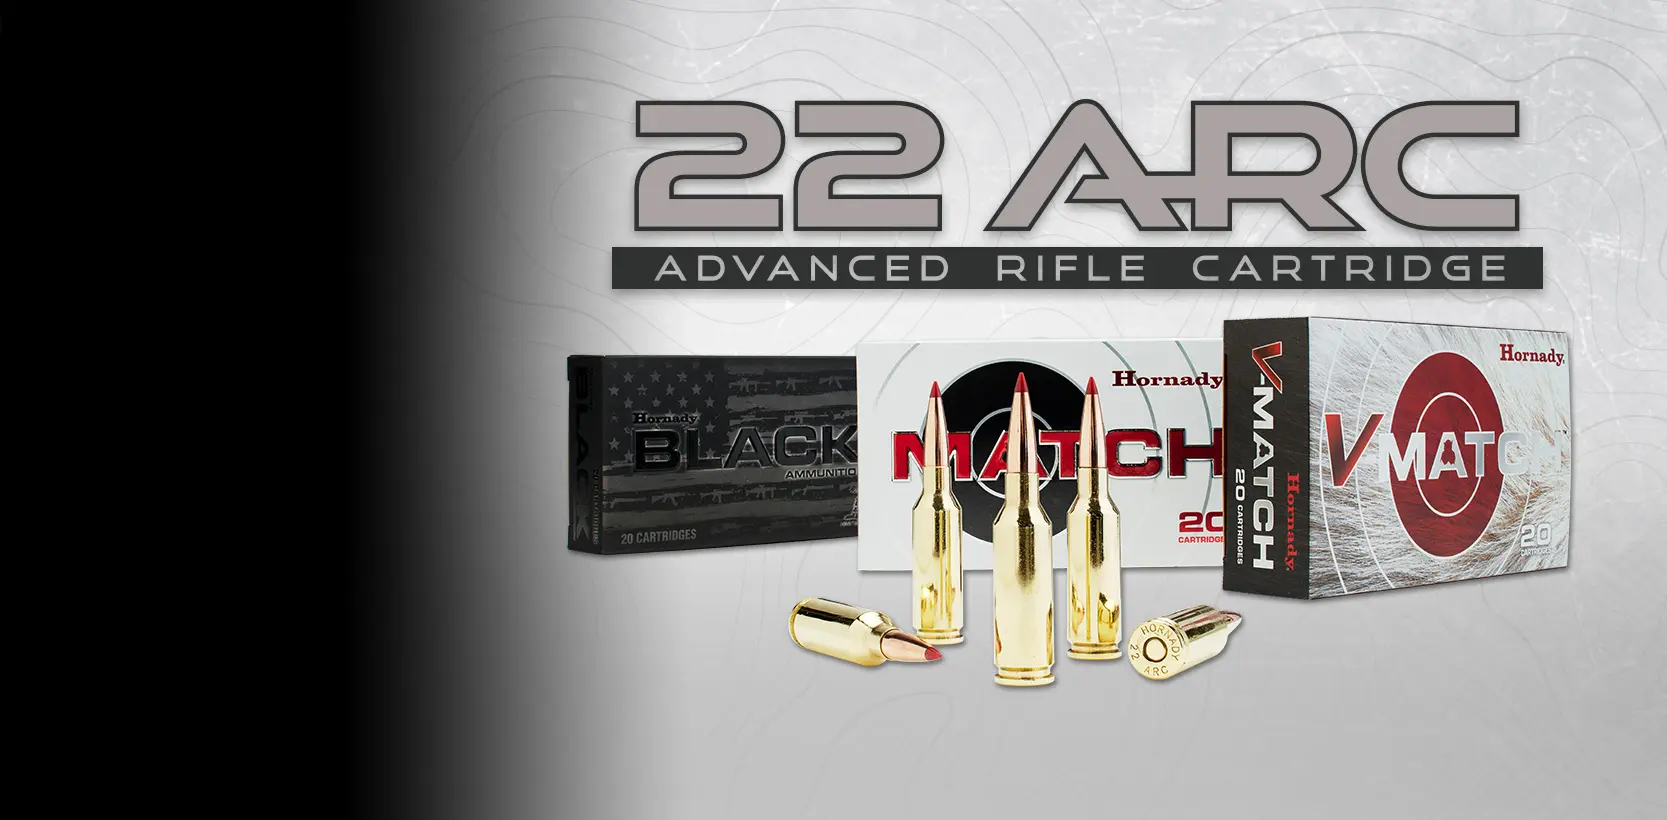 Slide number 4 PERFECT FIT,FLAWLESSFUNCTIONALITY
The 22 ARC (Advanced Rifle Cartridge) brings exceptional power and performance, elegantly packed into a compact cartridge that fits into your AR-15 but is equally at home in a bolt action.Find Out More